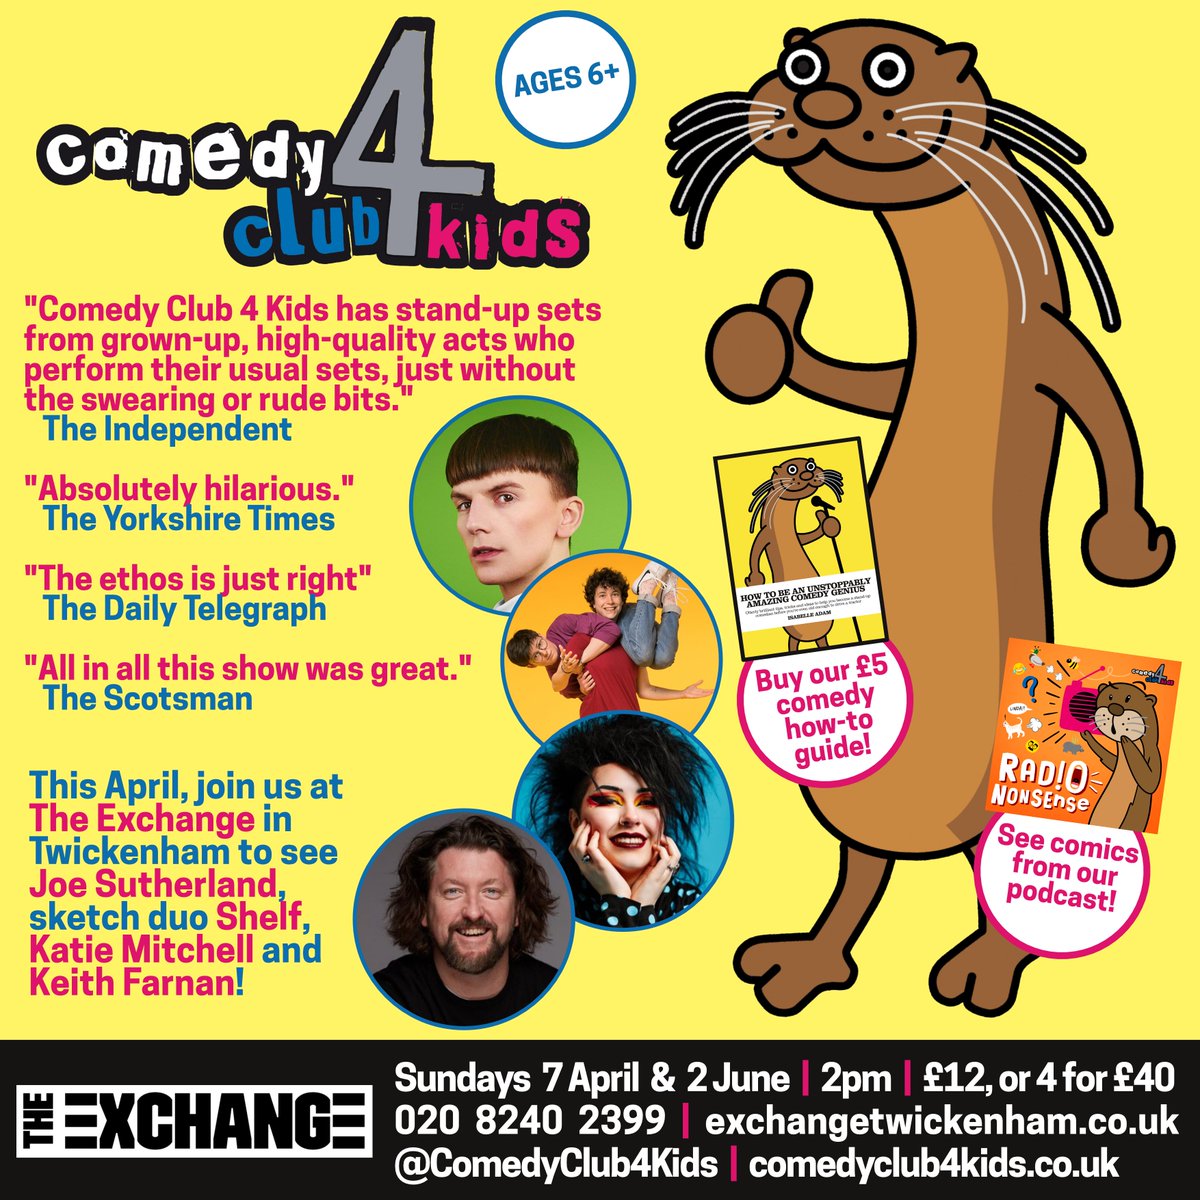 Twickenham! Families of South-West London! We're back at @ExchangeTwick on Sunday 7th April, with stand-up & sketch goodness from Joe Sutherland, @shelfcomedy, @katiezoemitch and @KeithFarnan! JOIN US! exchangetwickenham.co.uk/event/comedy-c…